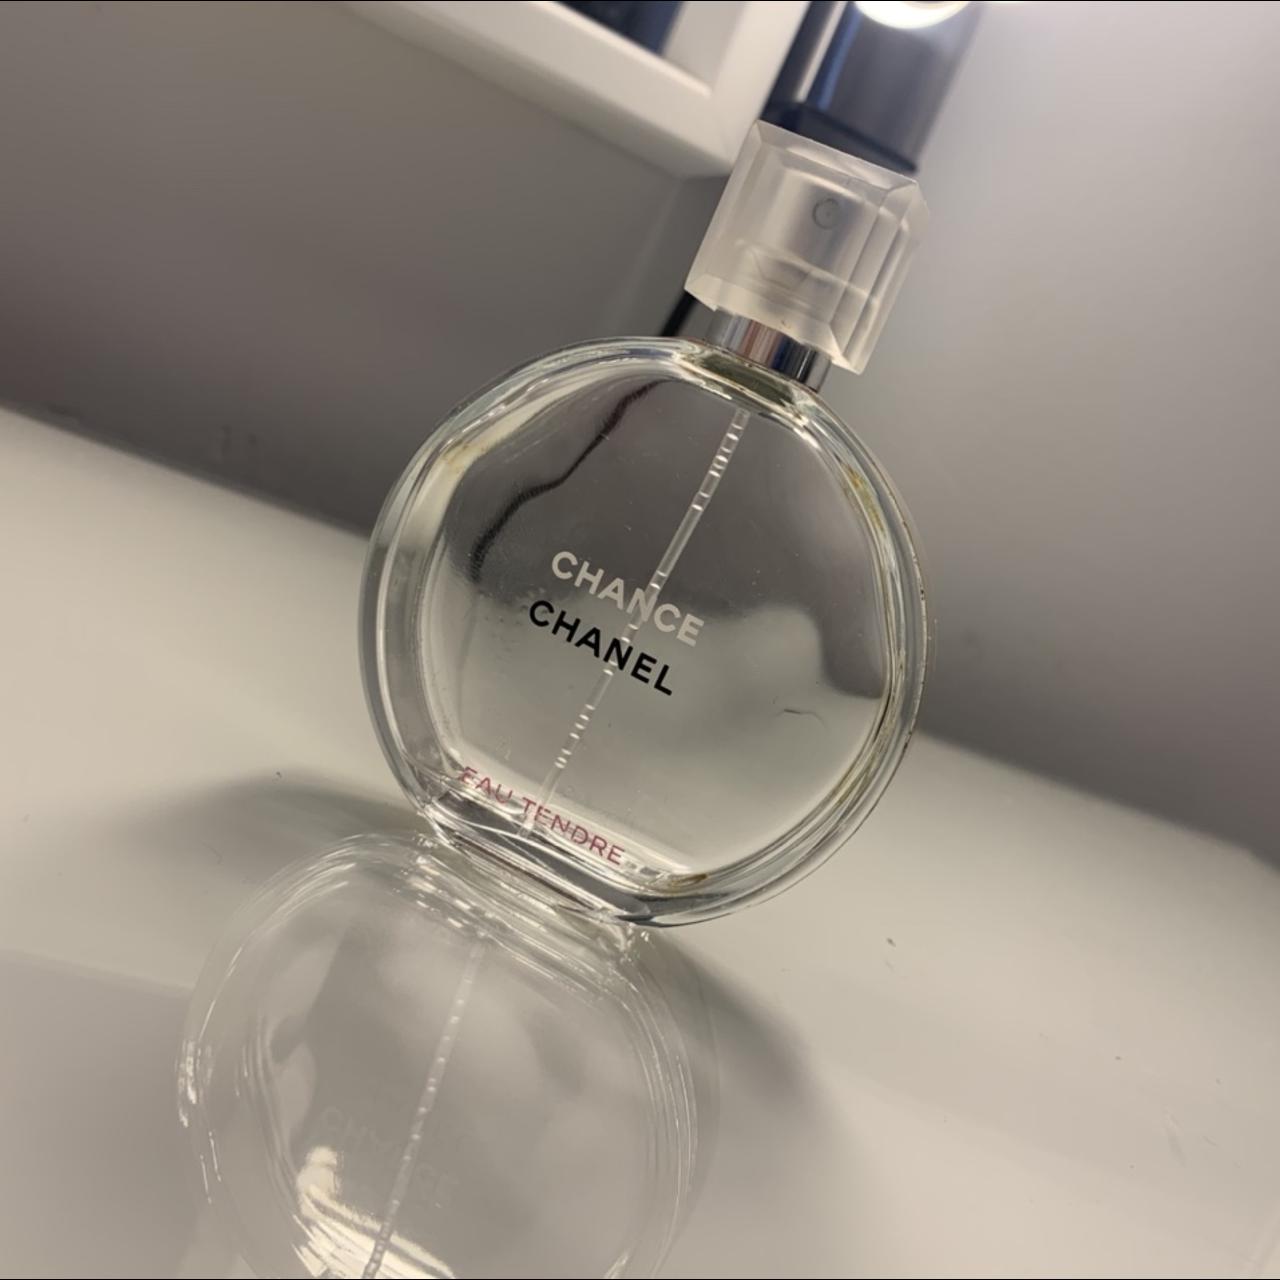 Empty Chanel Chance perfume bottle for crafting or - Depop